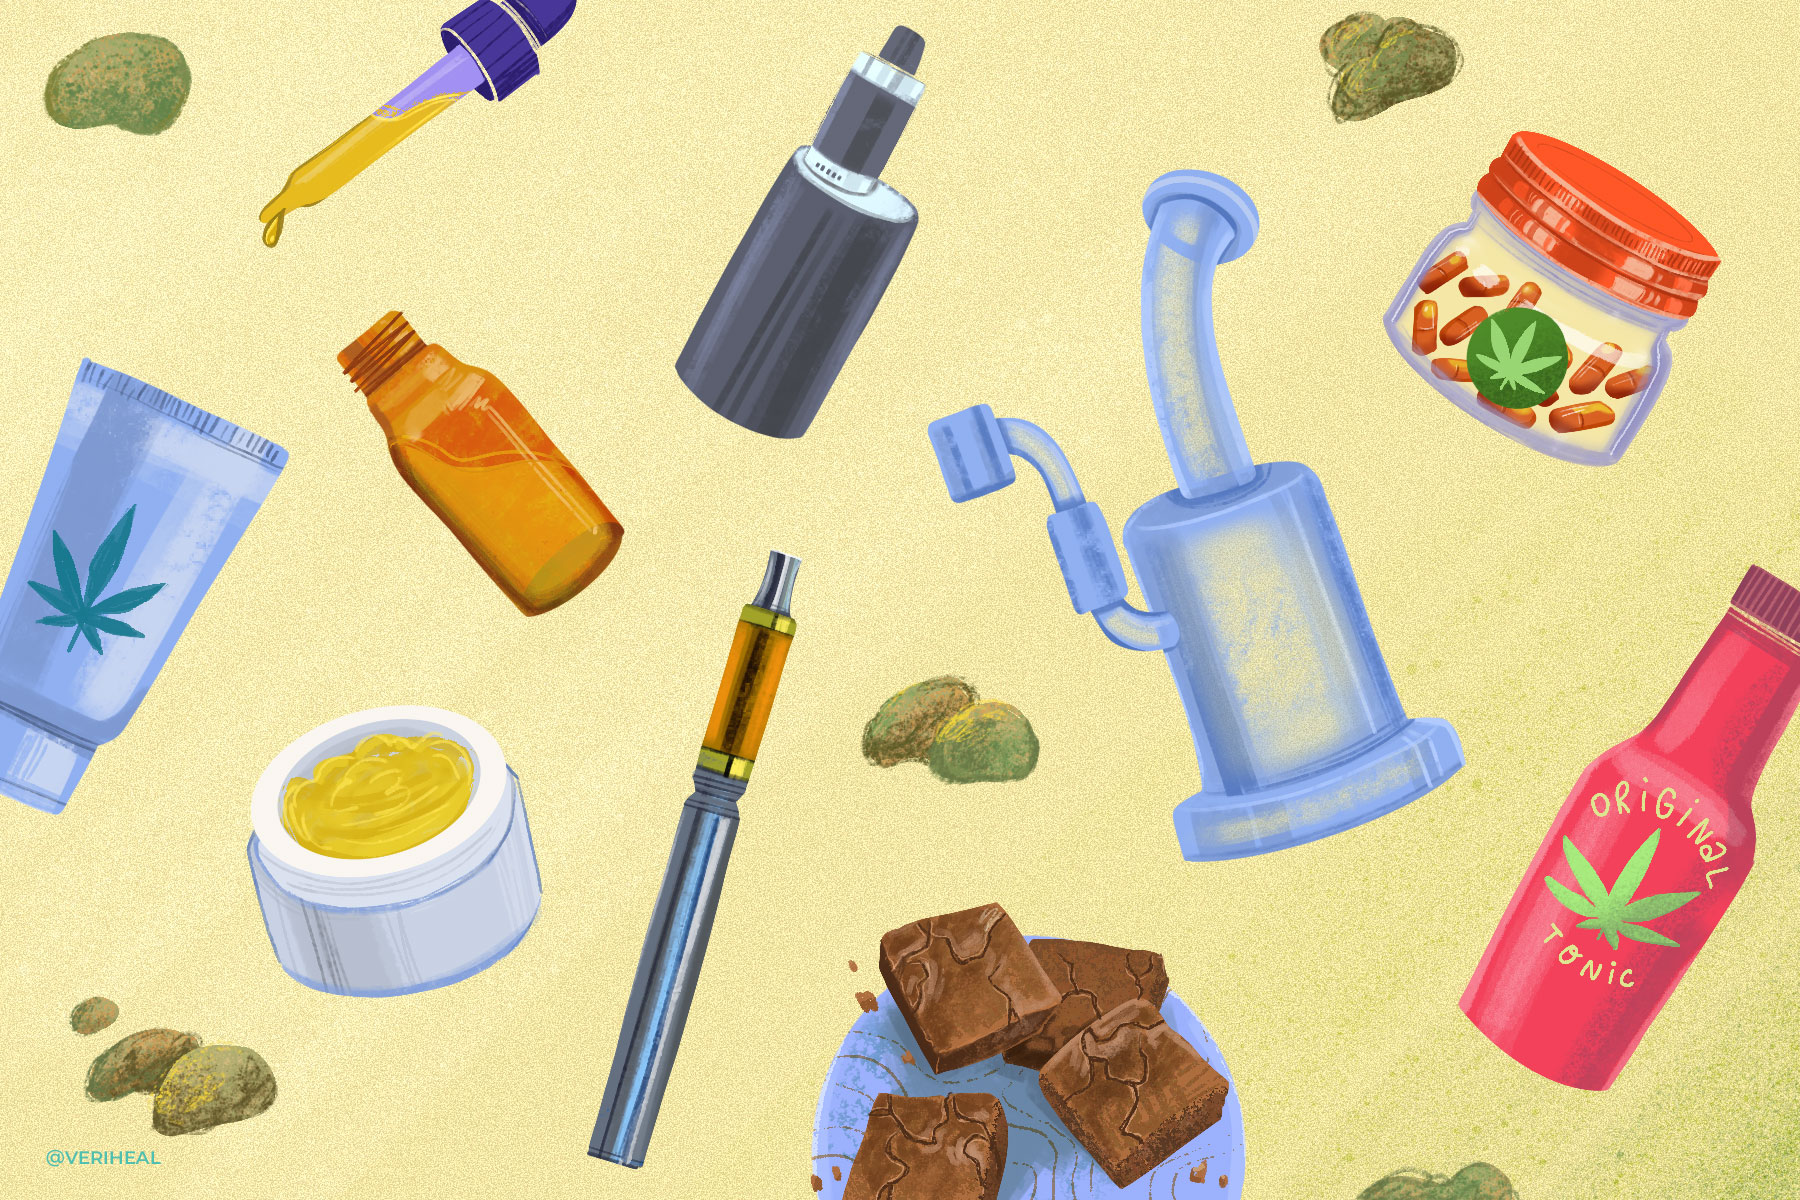 How to Use Cannabis Without Smoking